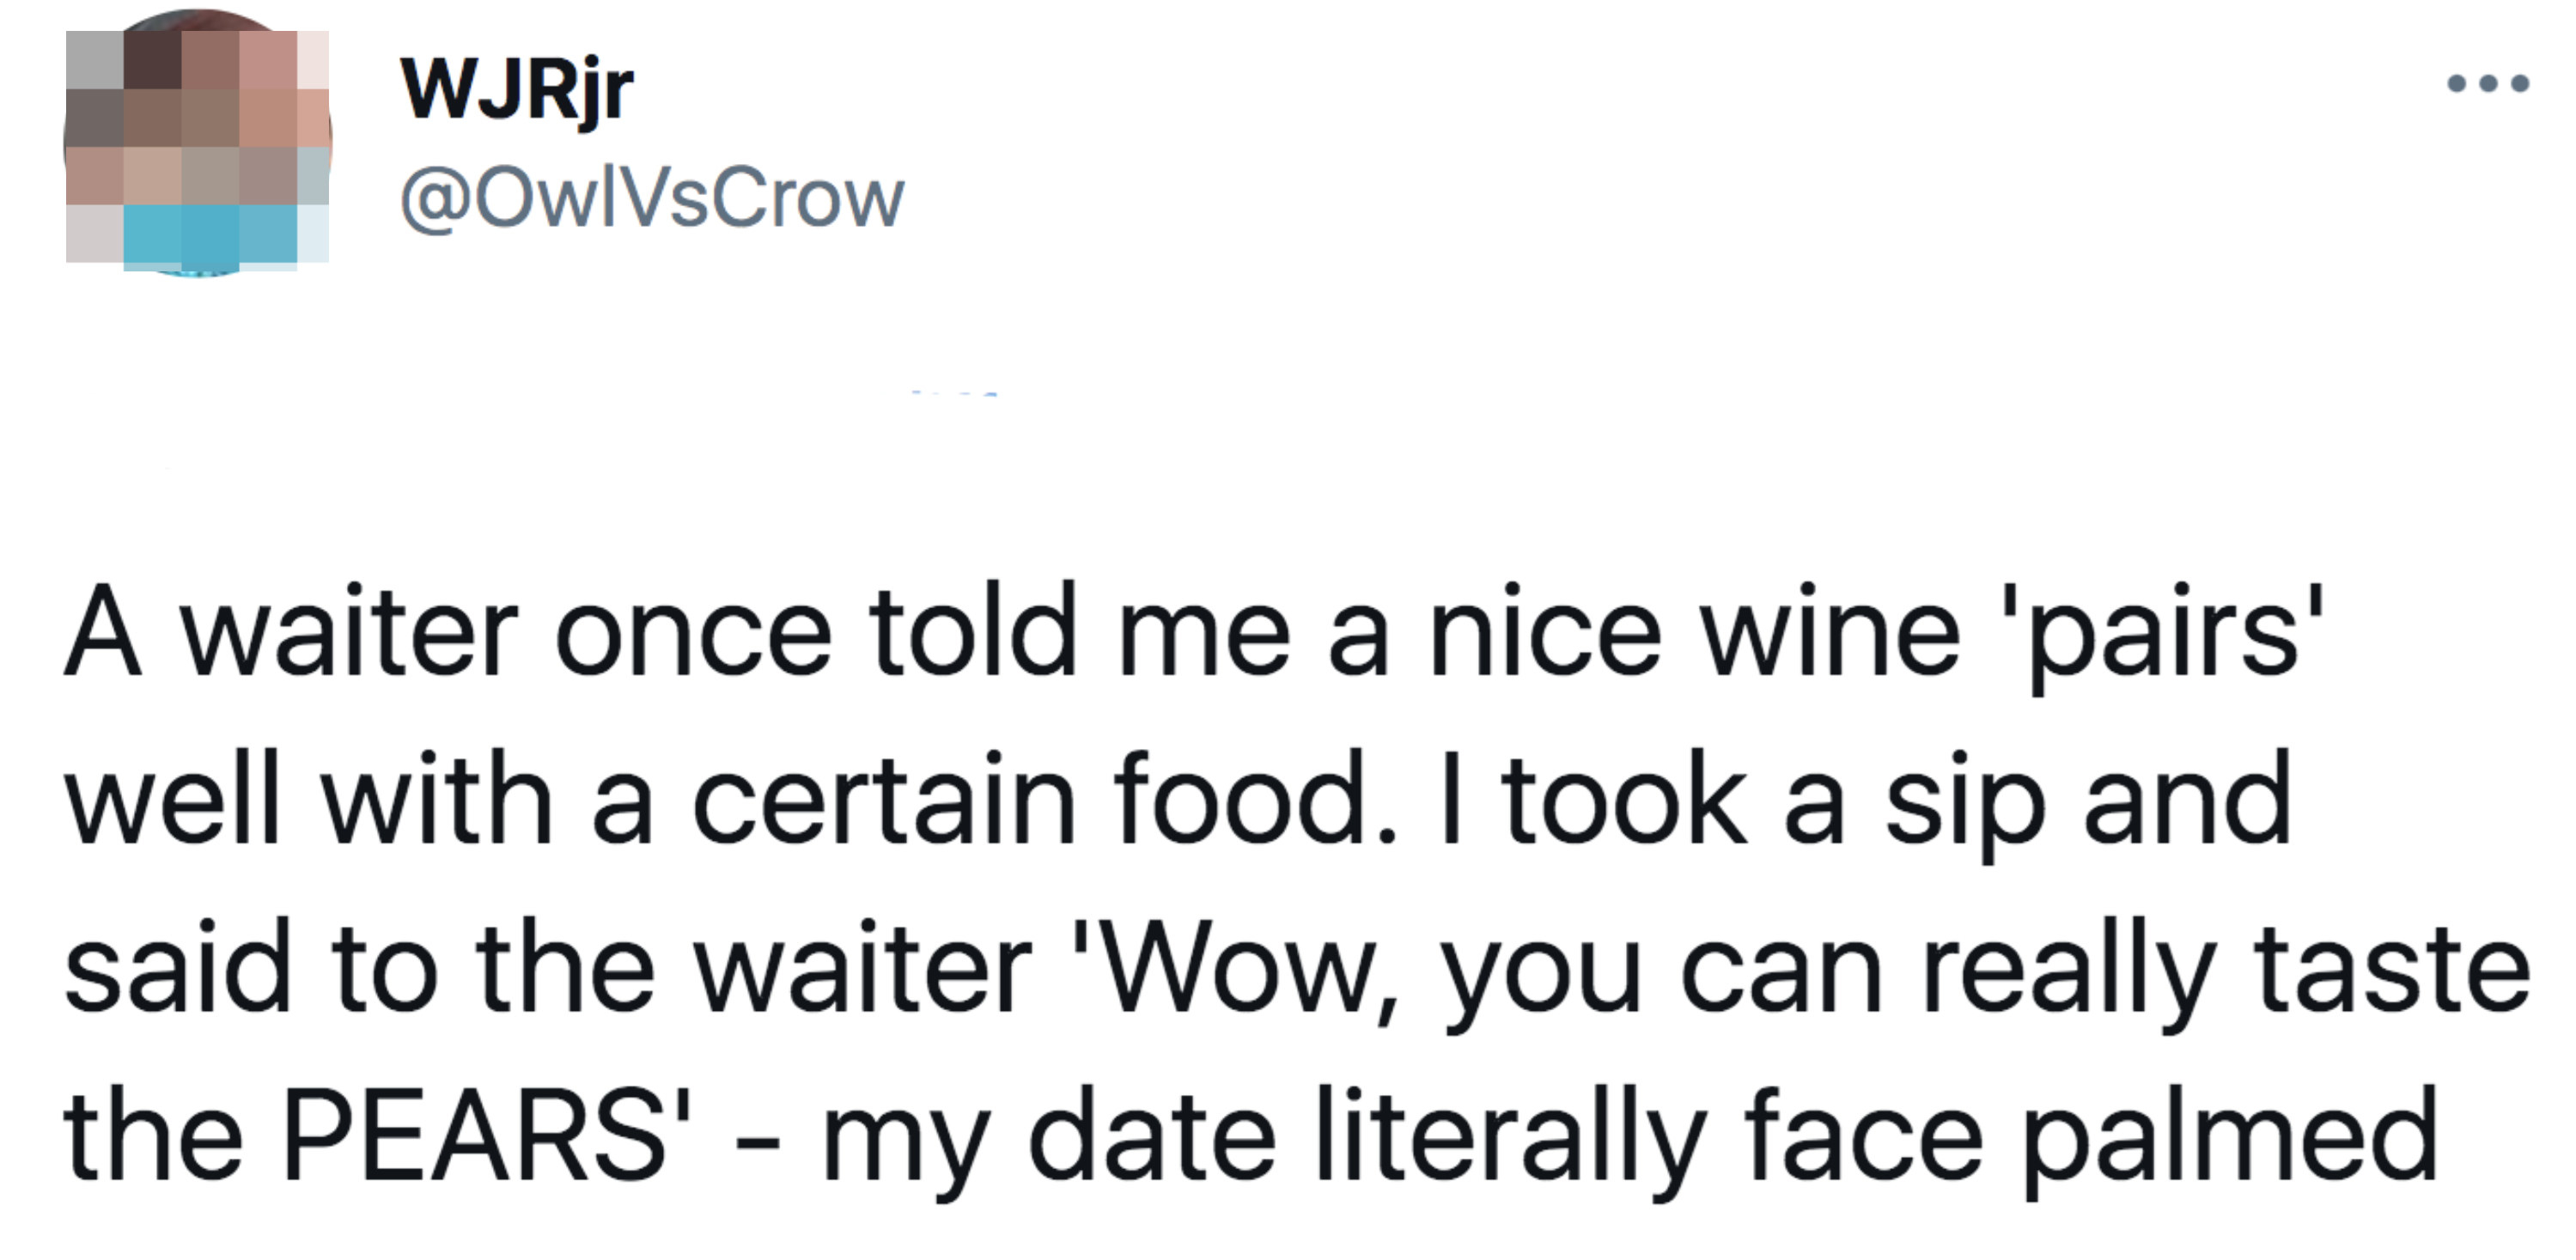 tweet reading, &quot;A water once told me a nice wine &#x27;pairs&#x27; well with a certain food. I took a sip and said to the waiter, &#x27;Wow you can really taste the pears.&#x27; My date literally facepalmed&quot;